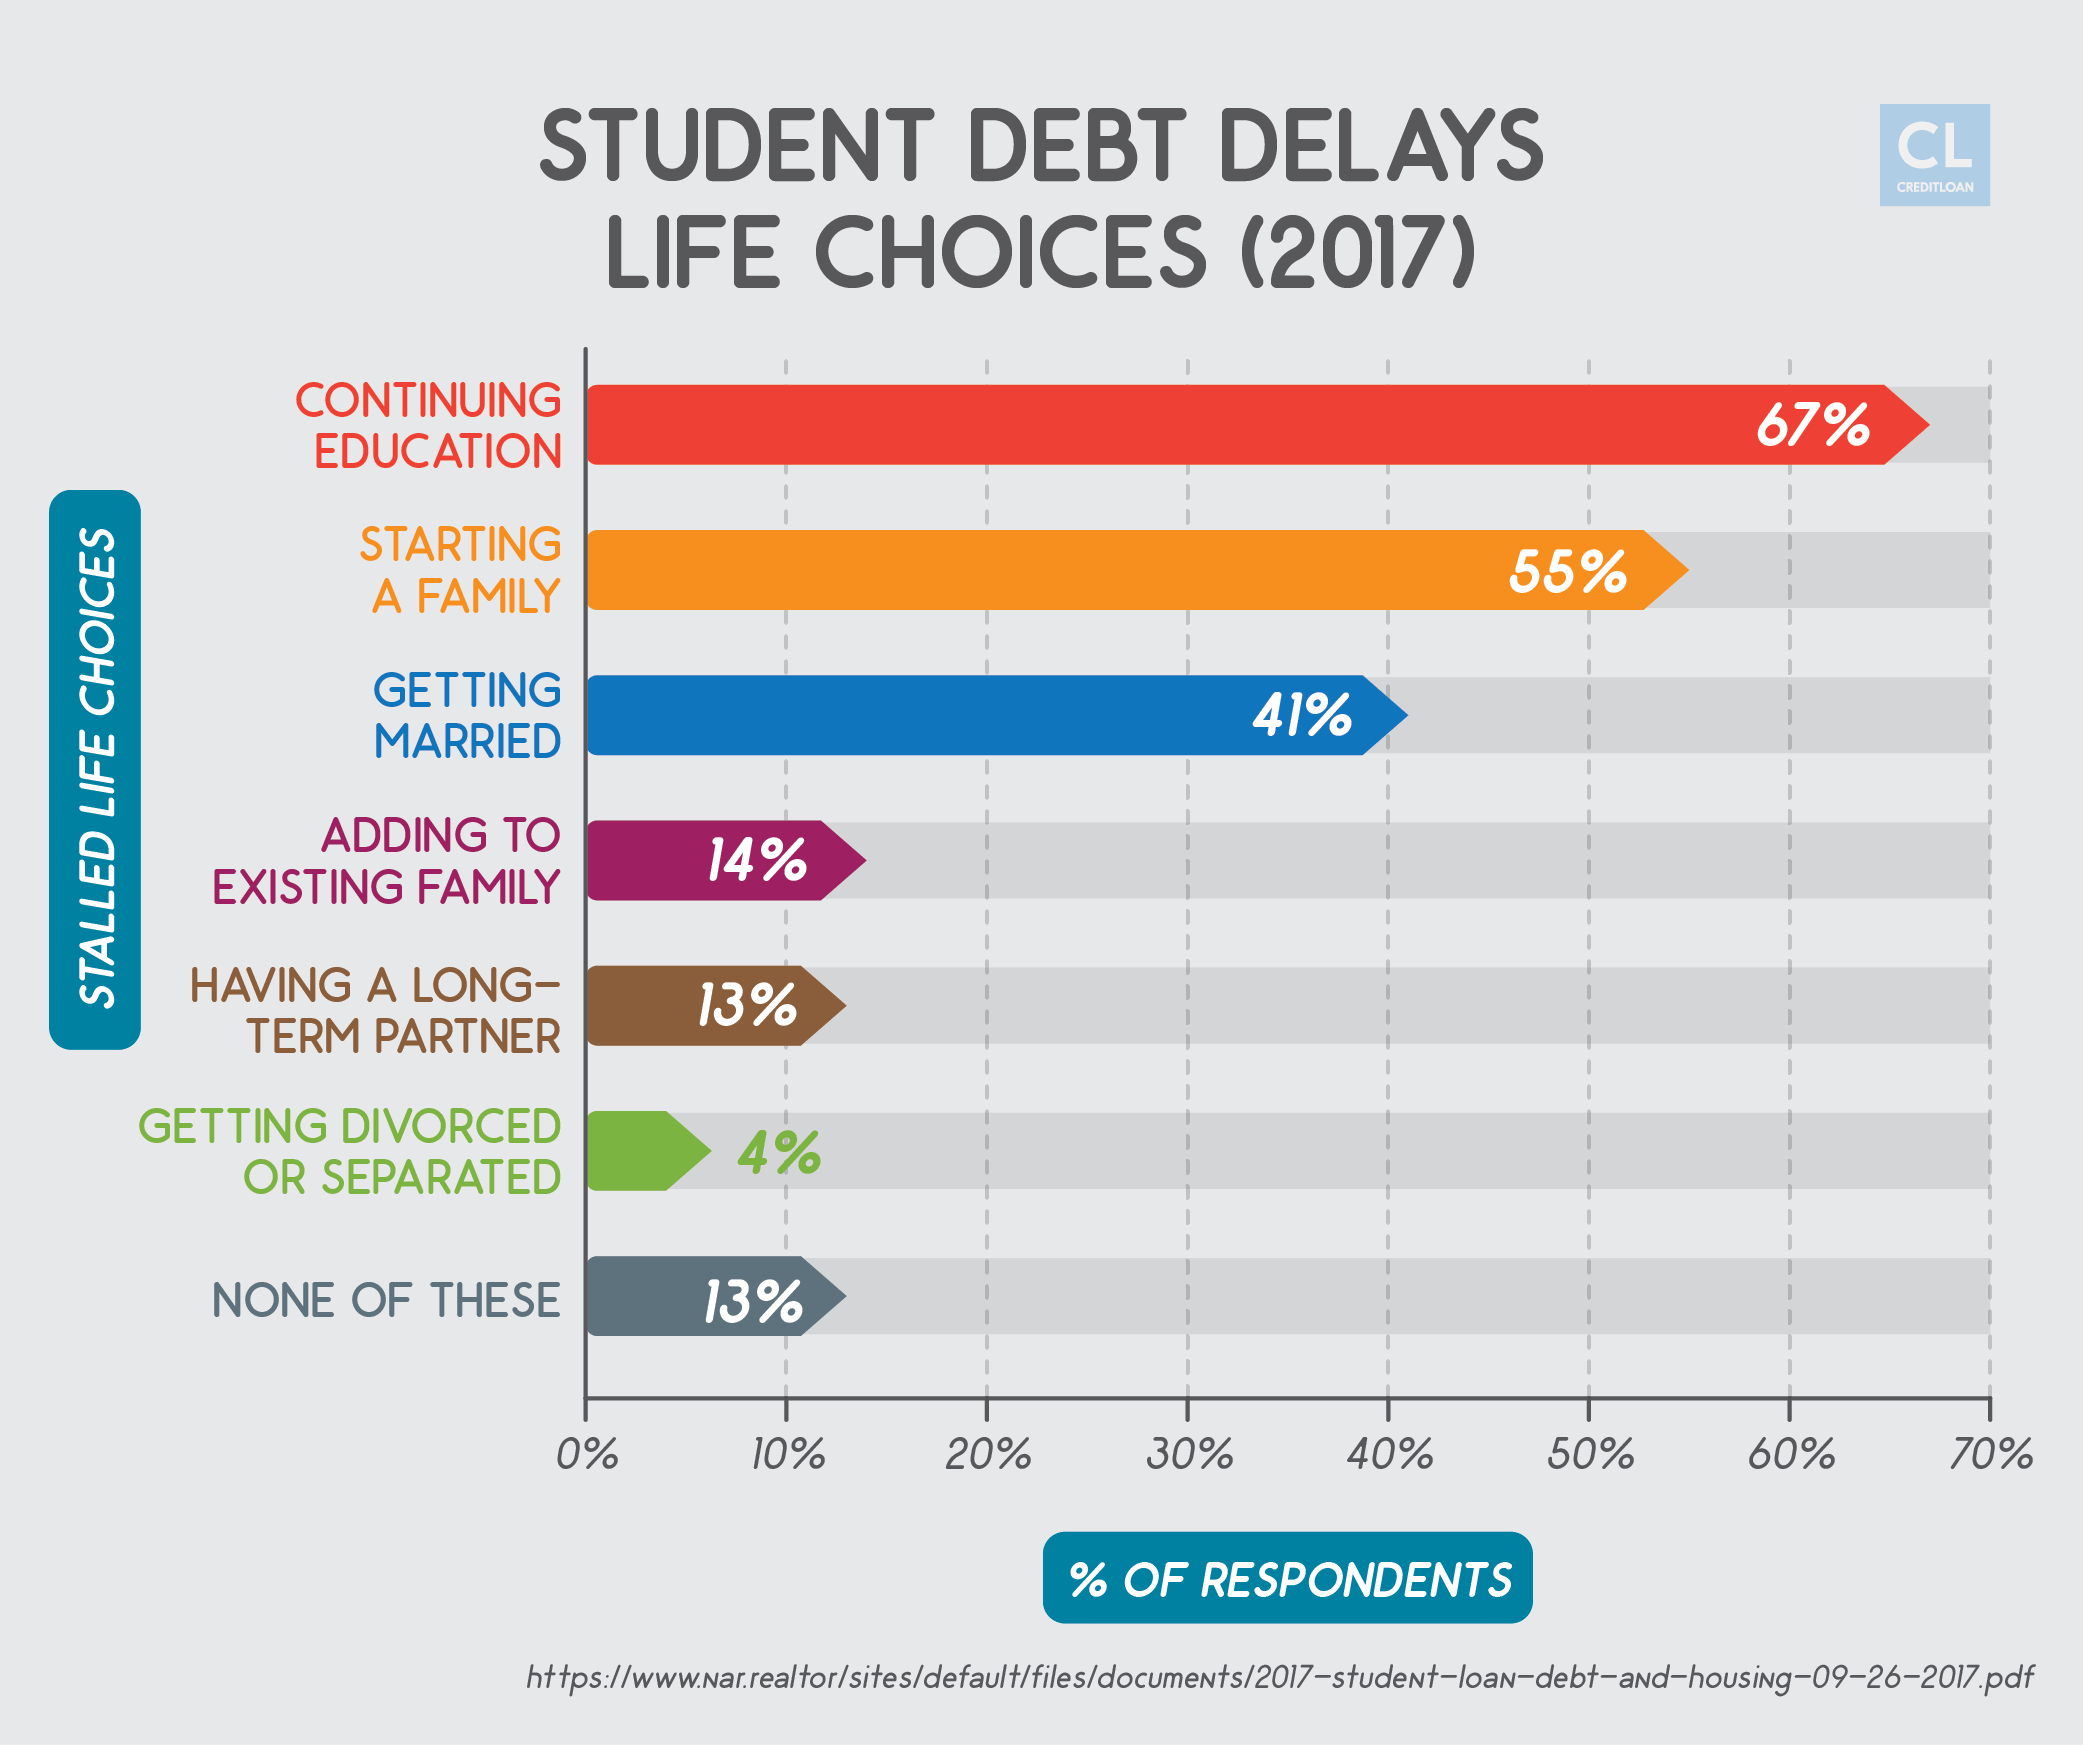 Student Debt Delaying Life Choices (2017)